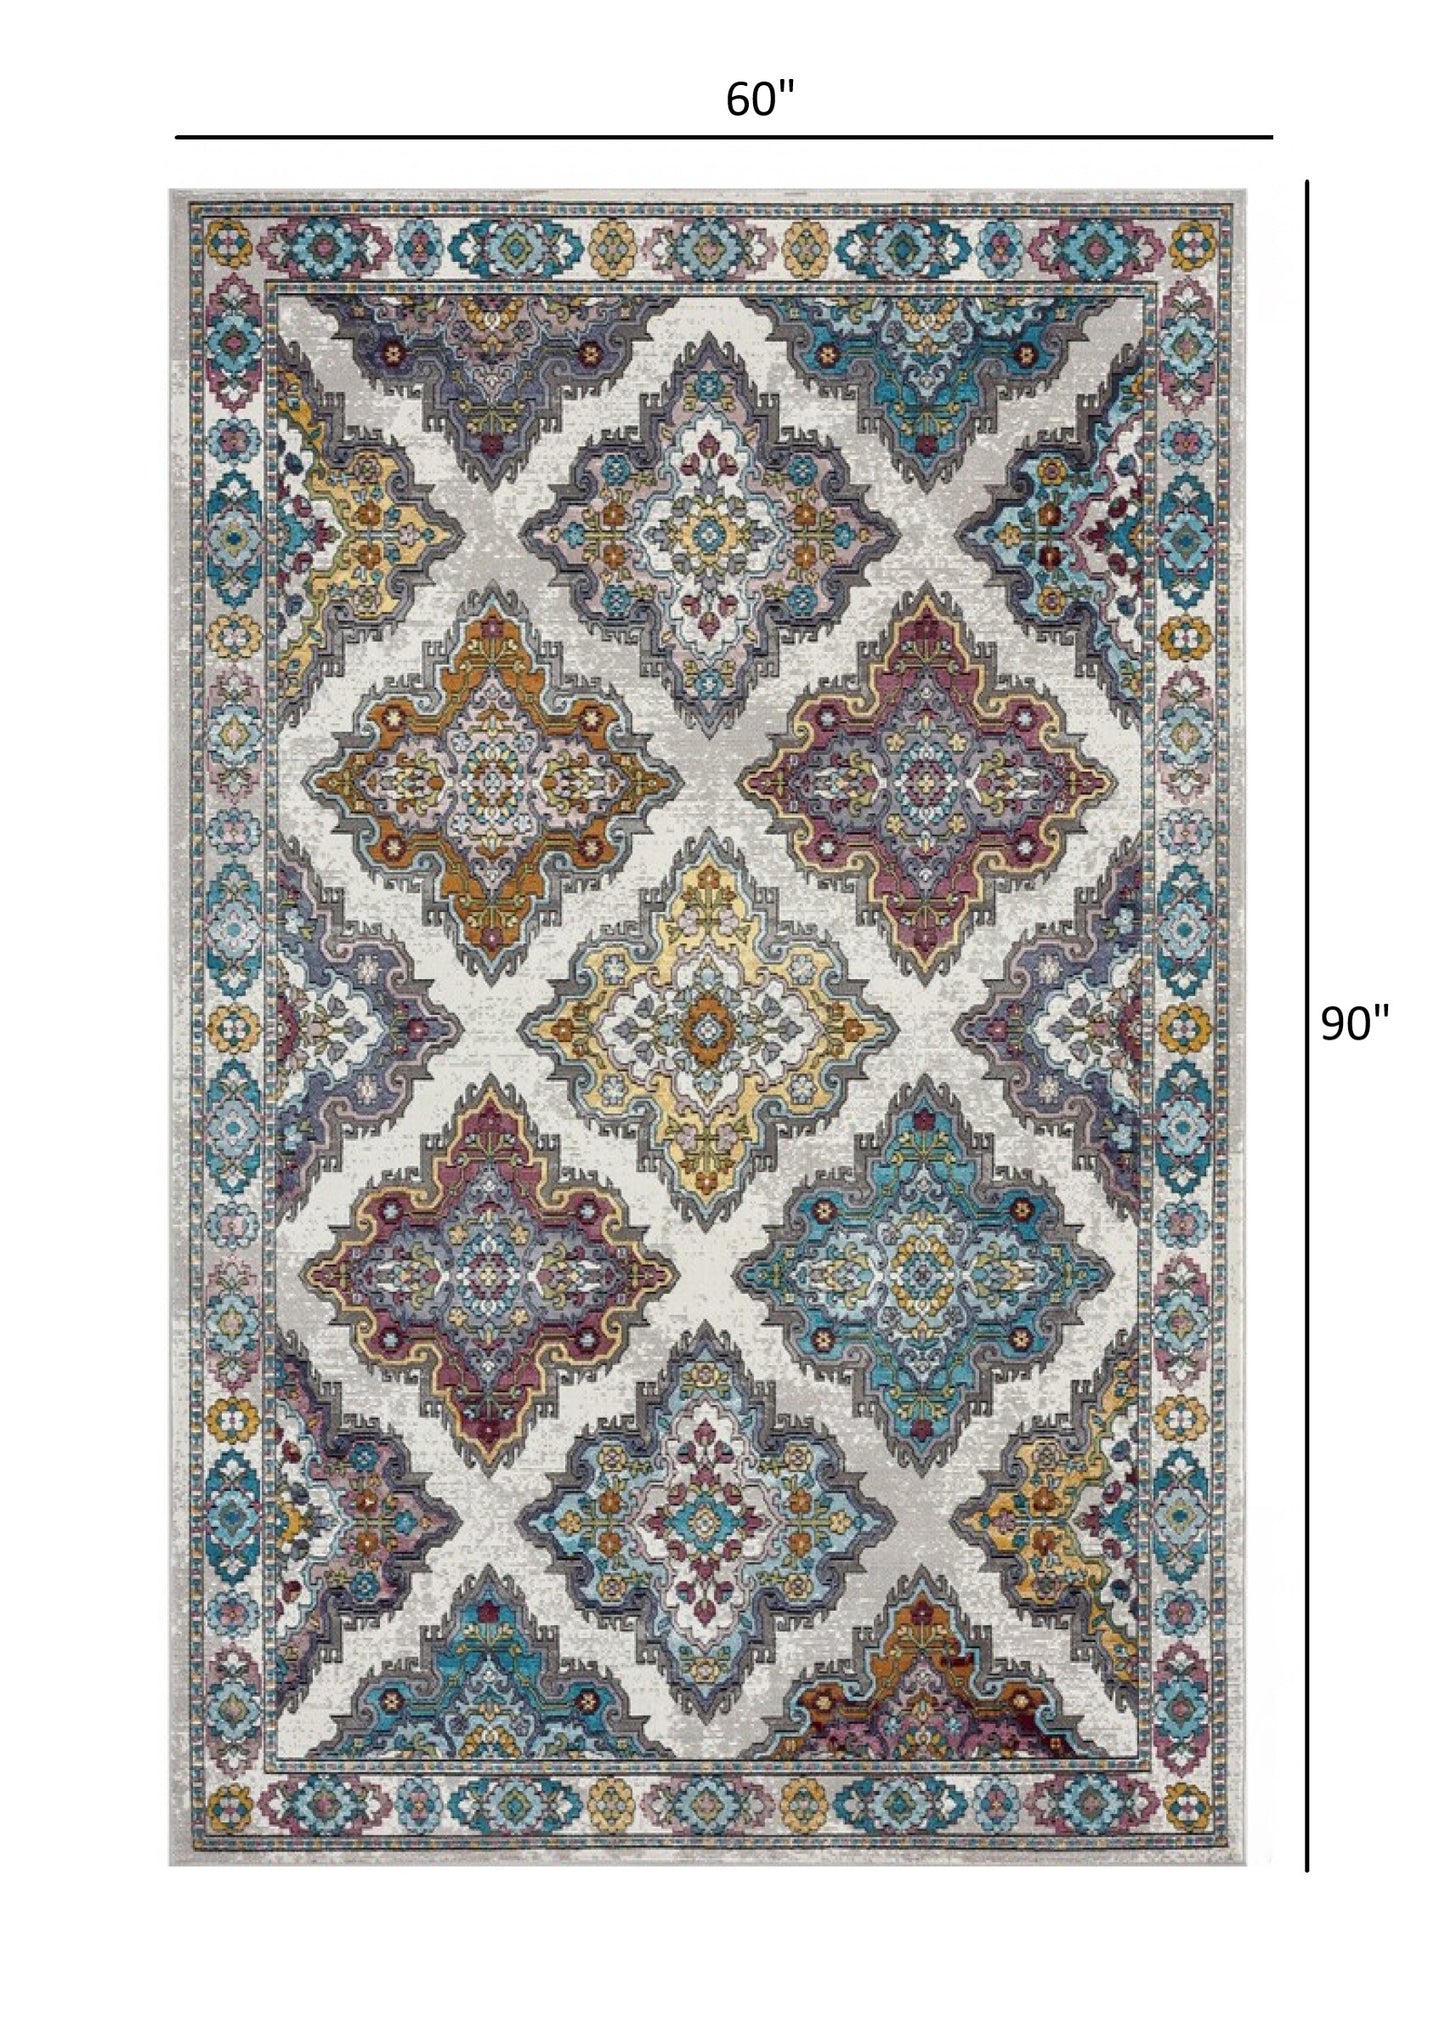 5’ x 8’ Blue Traditional Floral Motifs Area Rug